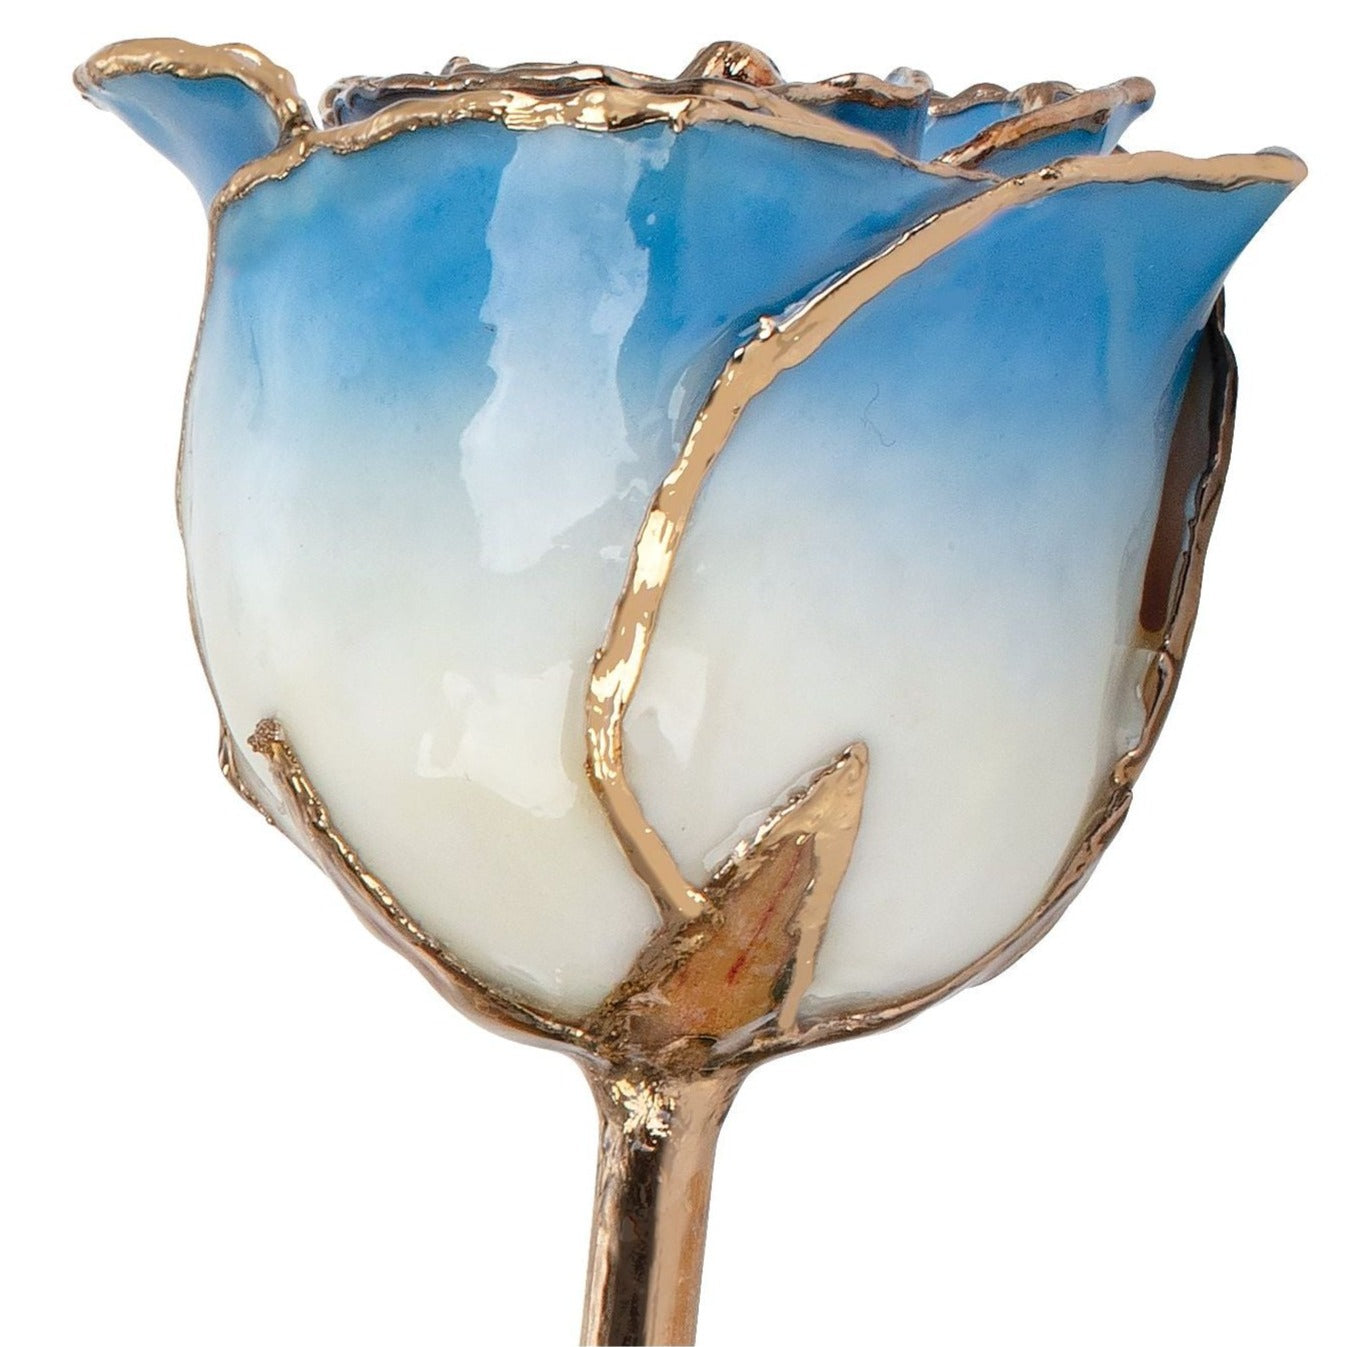 Preserved Cream Blue Rose with 24K Gold Trim for Luxury Home Decor